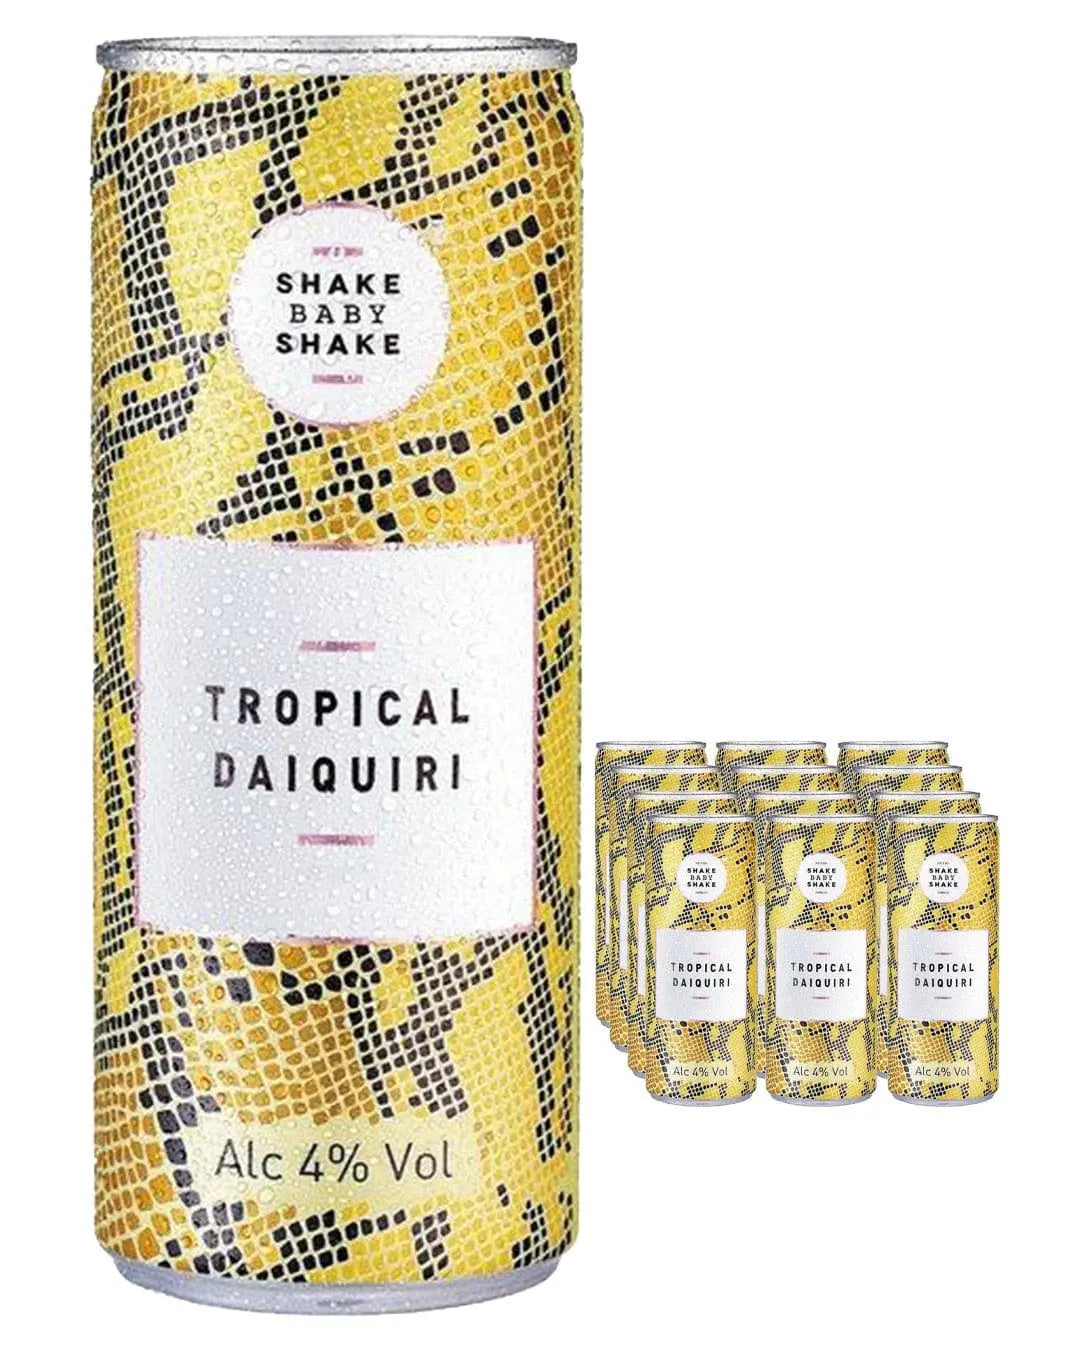 Shake Baby Shake Tropical Daiquiri Premixed Cocktail Multipack, 12 x 250 ml Ready Made Cocktails